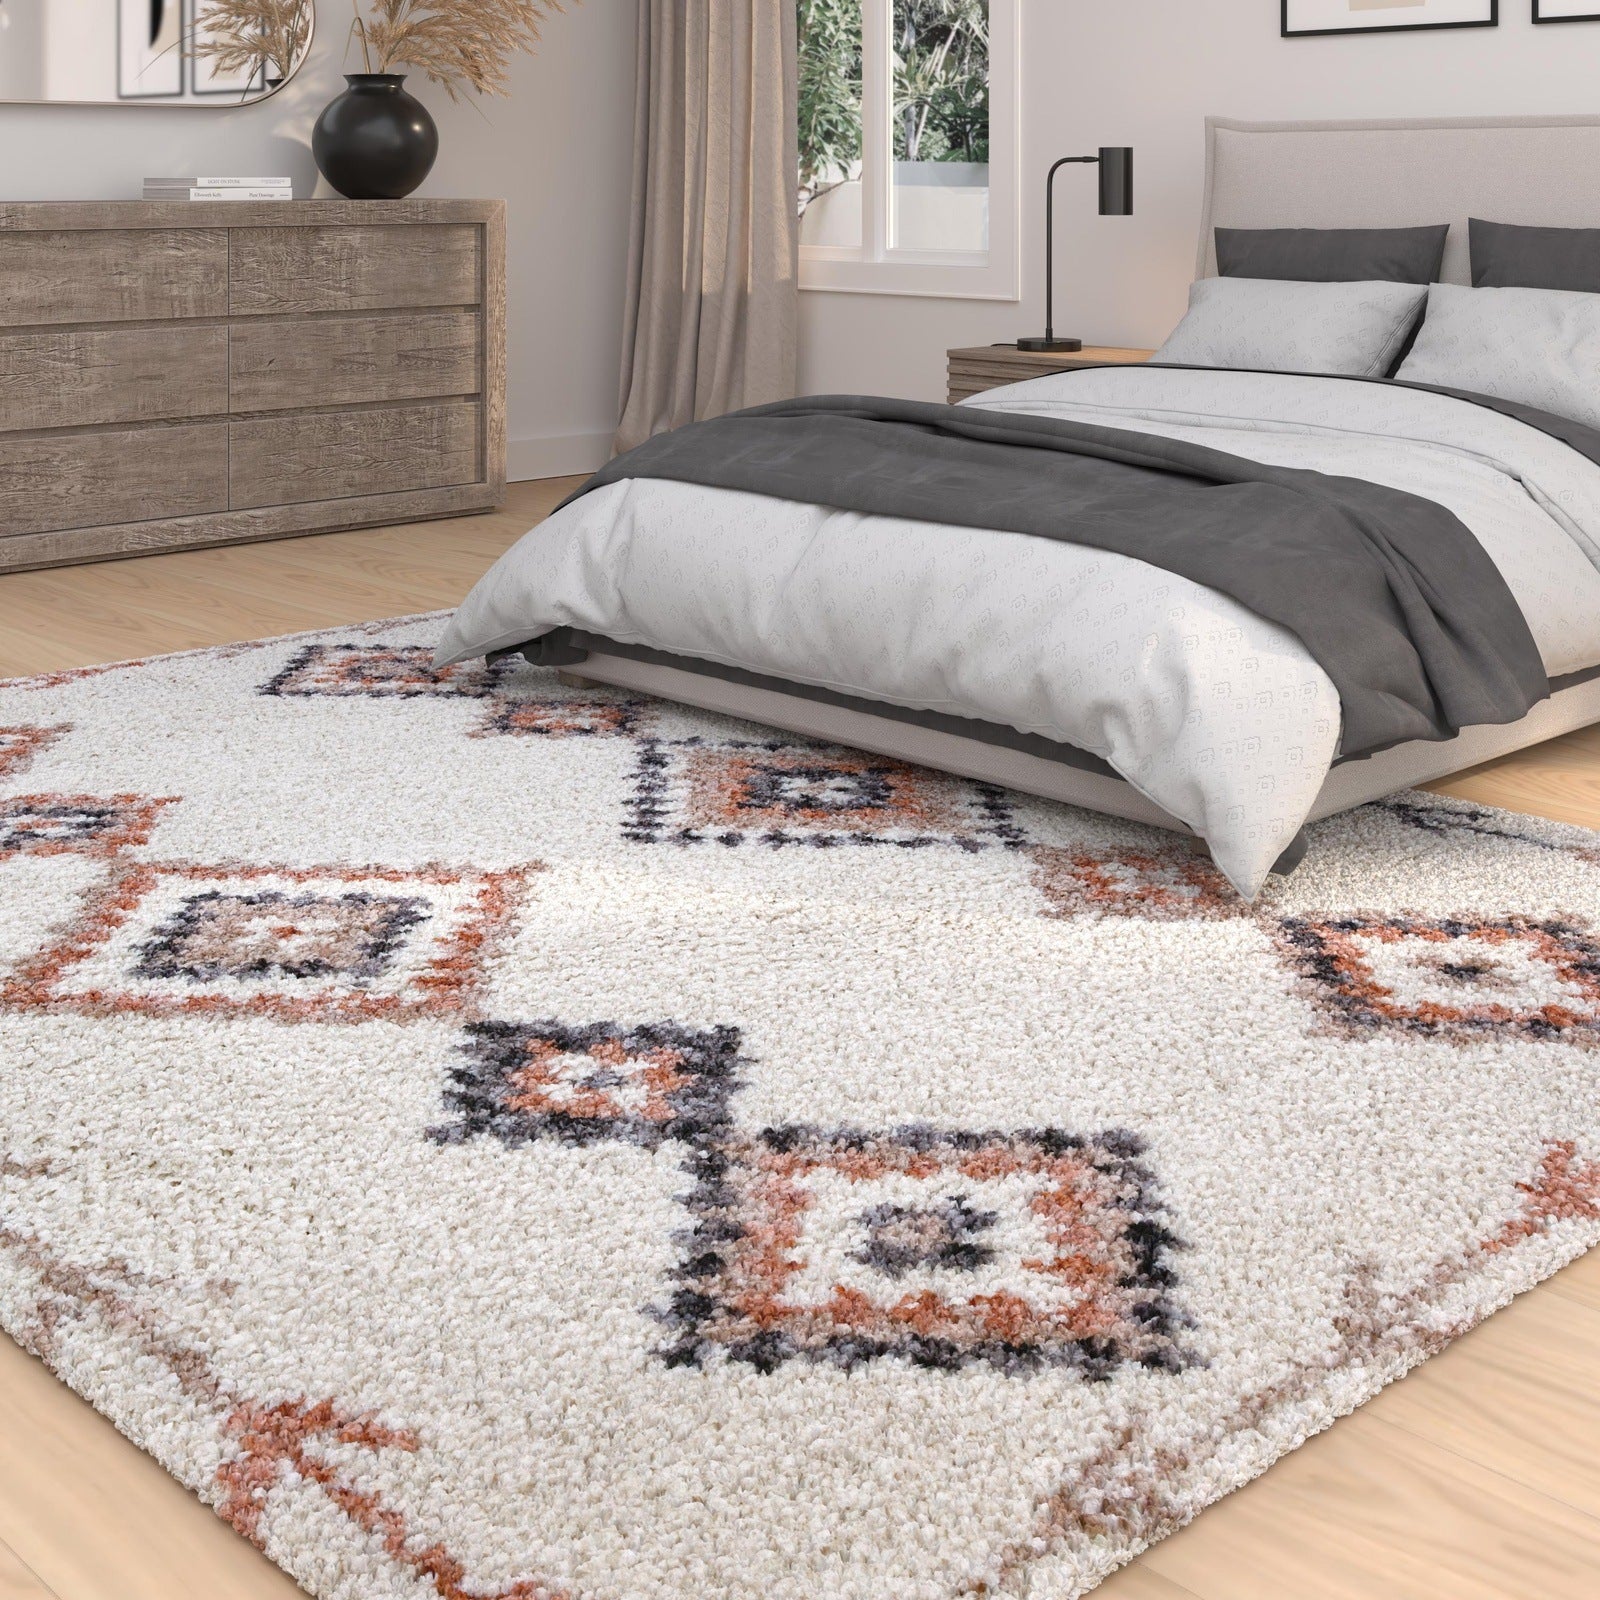 Oasis Eloven White and Multi-color Polyester Area Rug 8x10